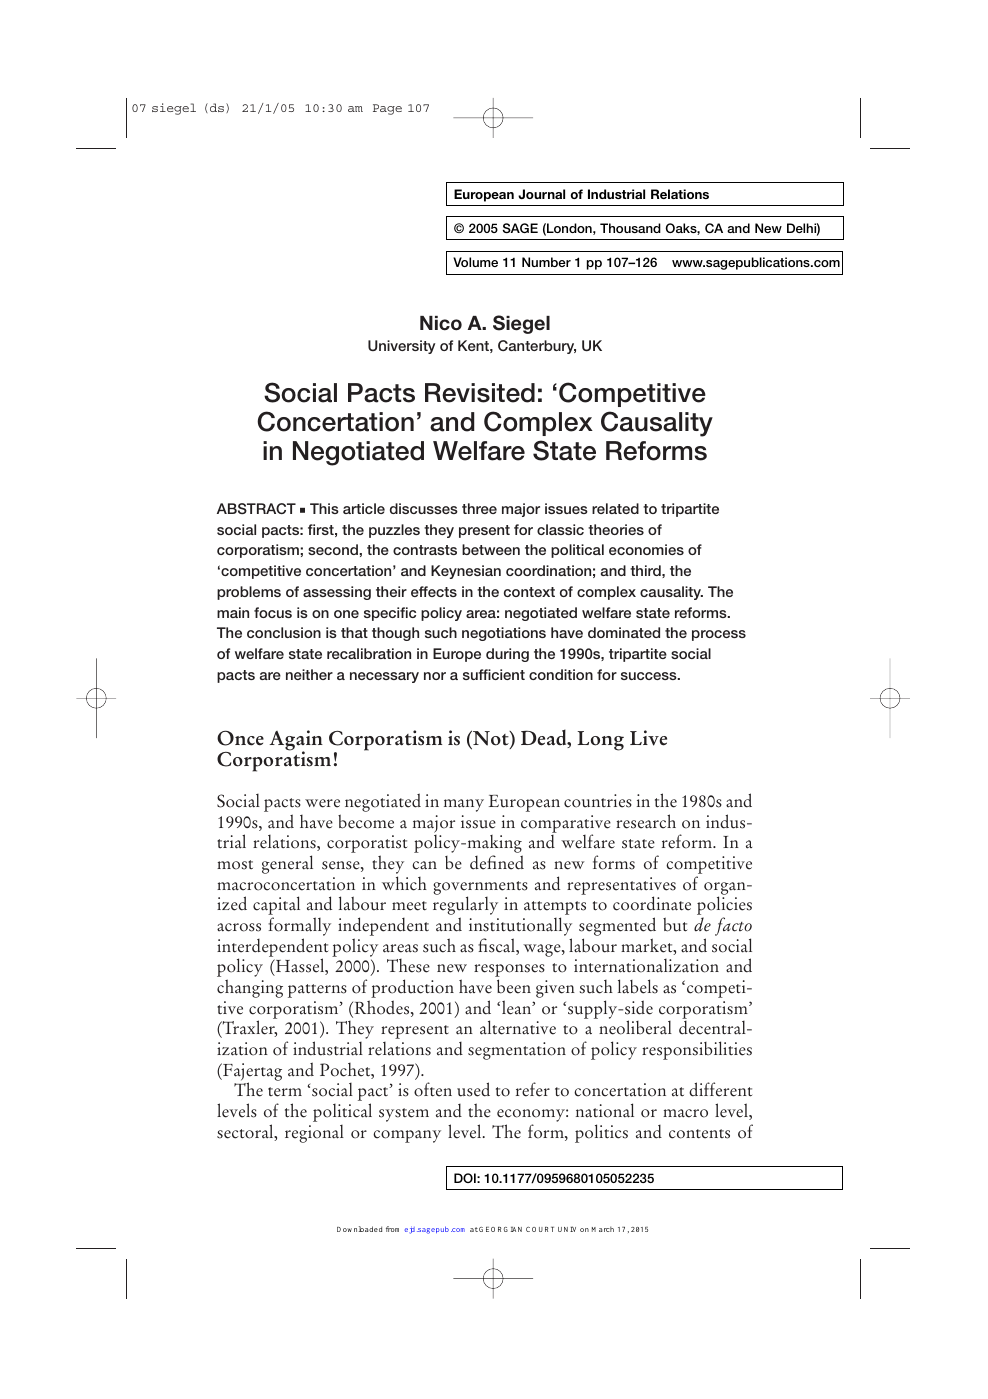 Social Pacts Revisited Competitive Concertation And Complex Causality In Negotiated Welfare State Reforms Topic Of Research Paper In Law Download Scholarly Article Pdf And Read For Free On Cyberleninka Open Science